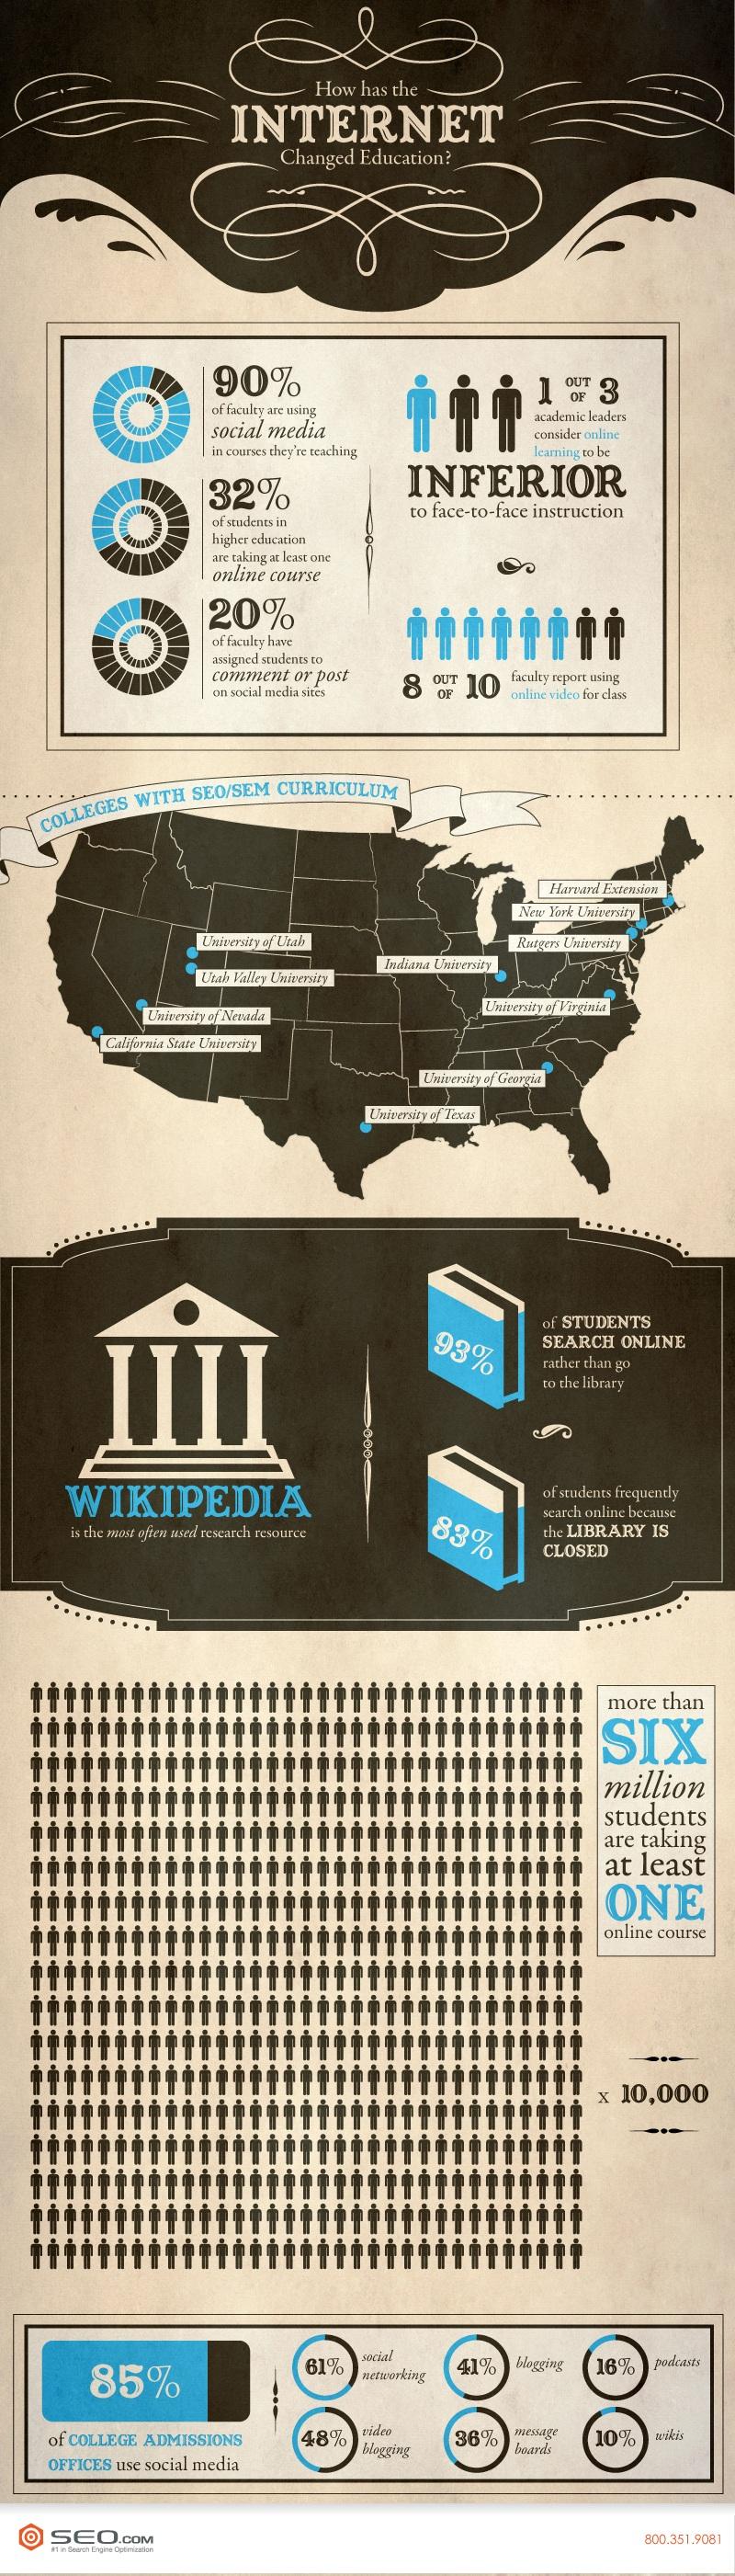 How Has Internet Impacted Education Infographic - How Has Internet Impacted Education Infographic